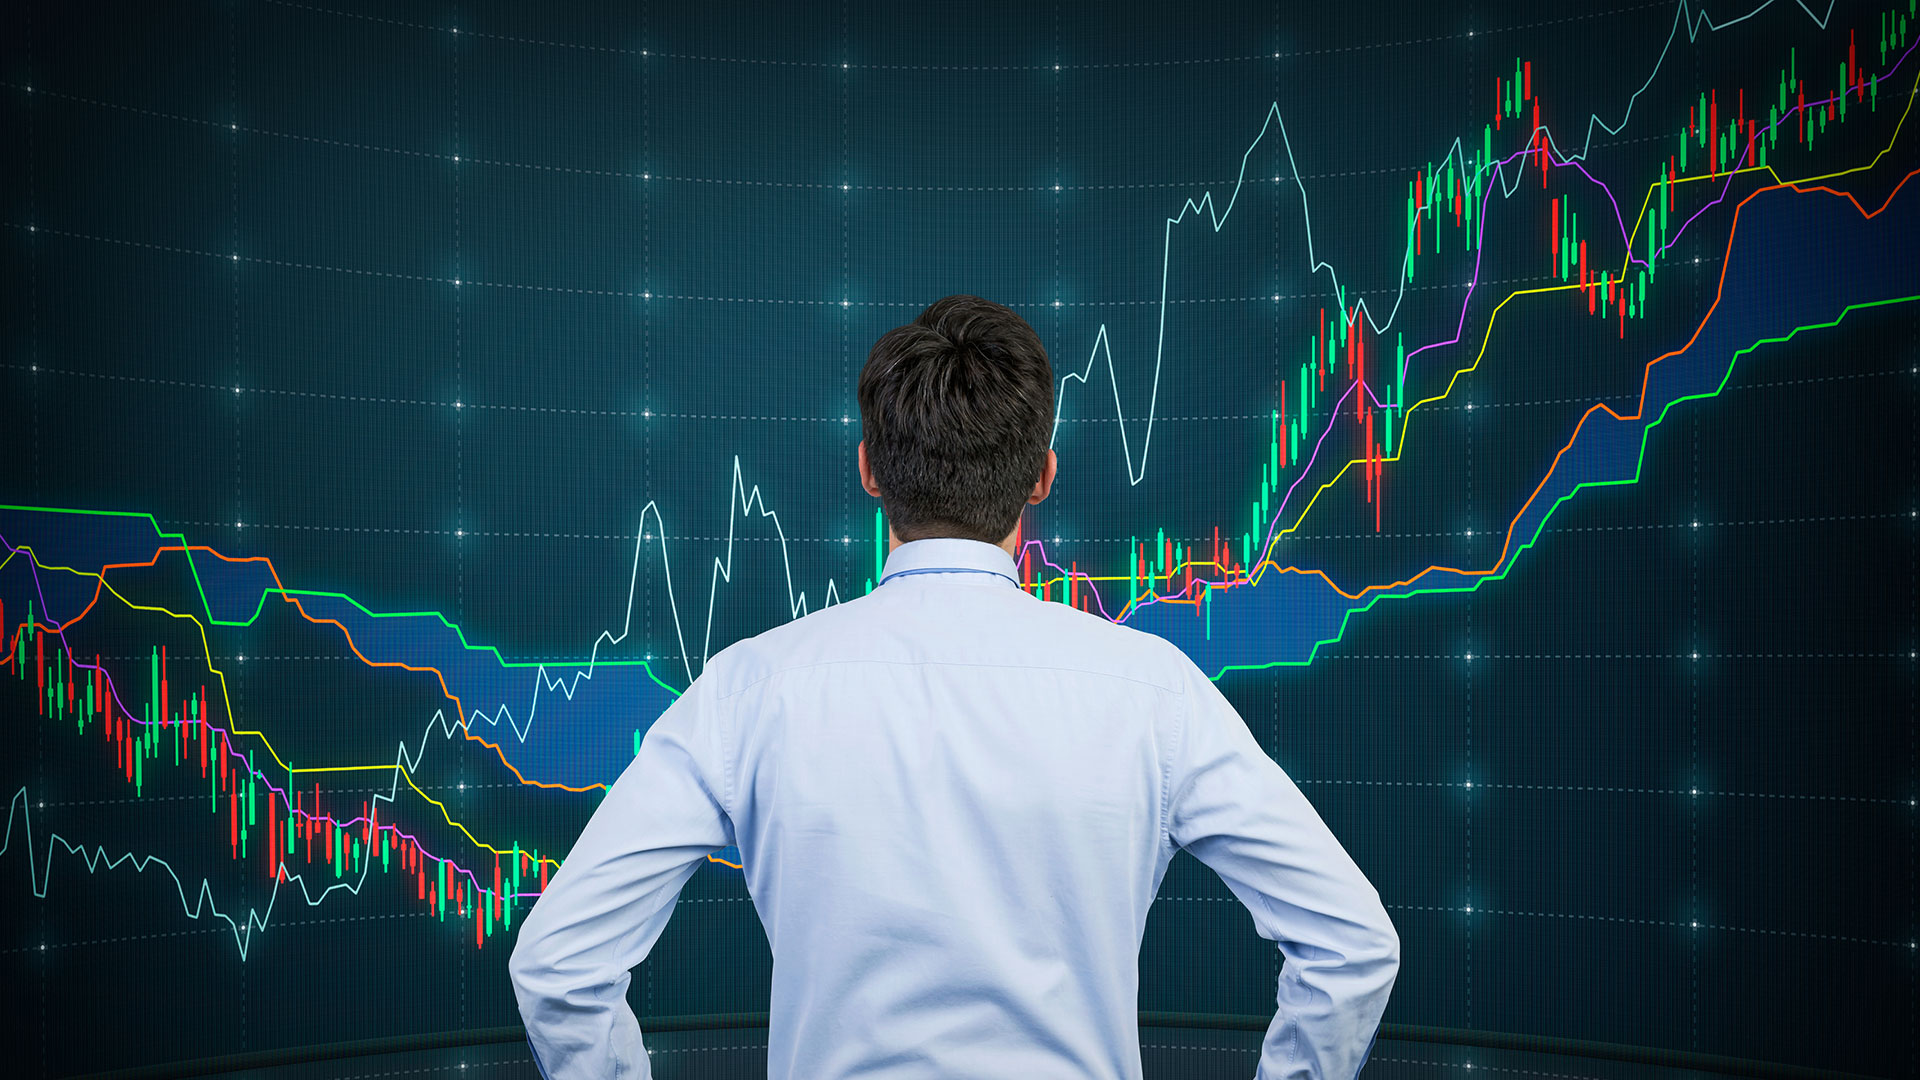 Market Movements: Analyzing Trends in Cfd trading